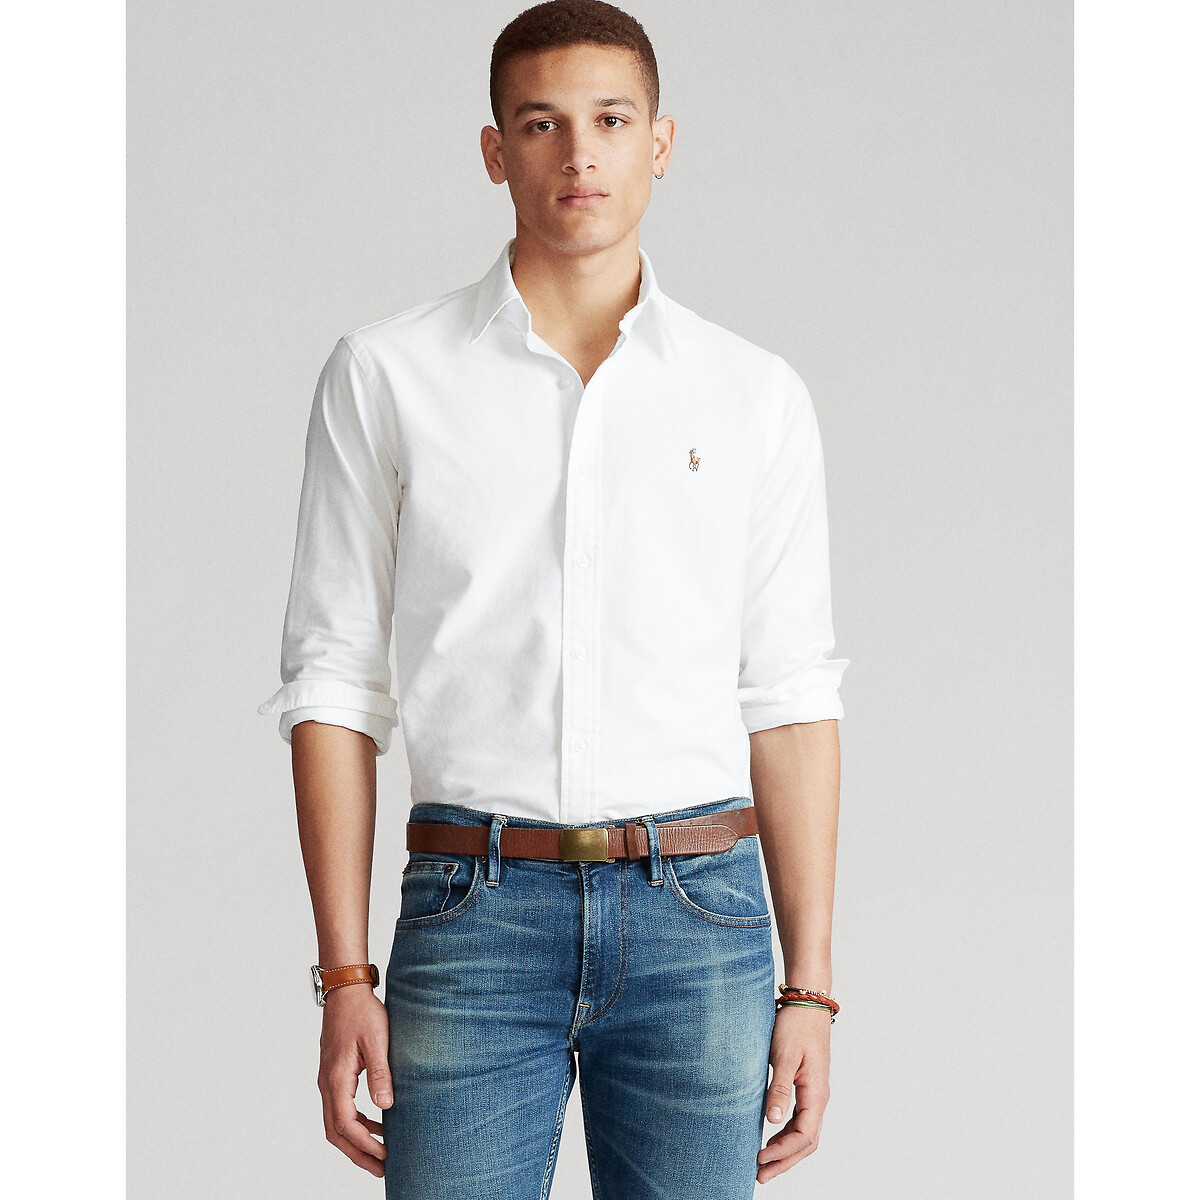 Custom fit oxford shirt in stretch cotton, white, Polo Ralph Lauren ...